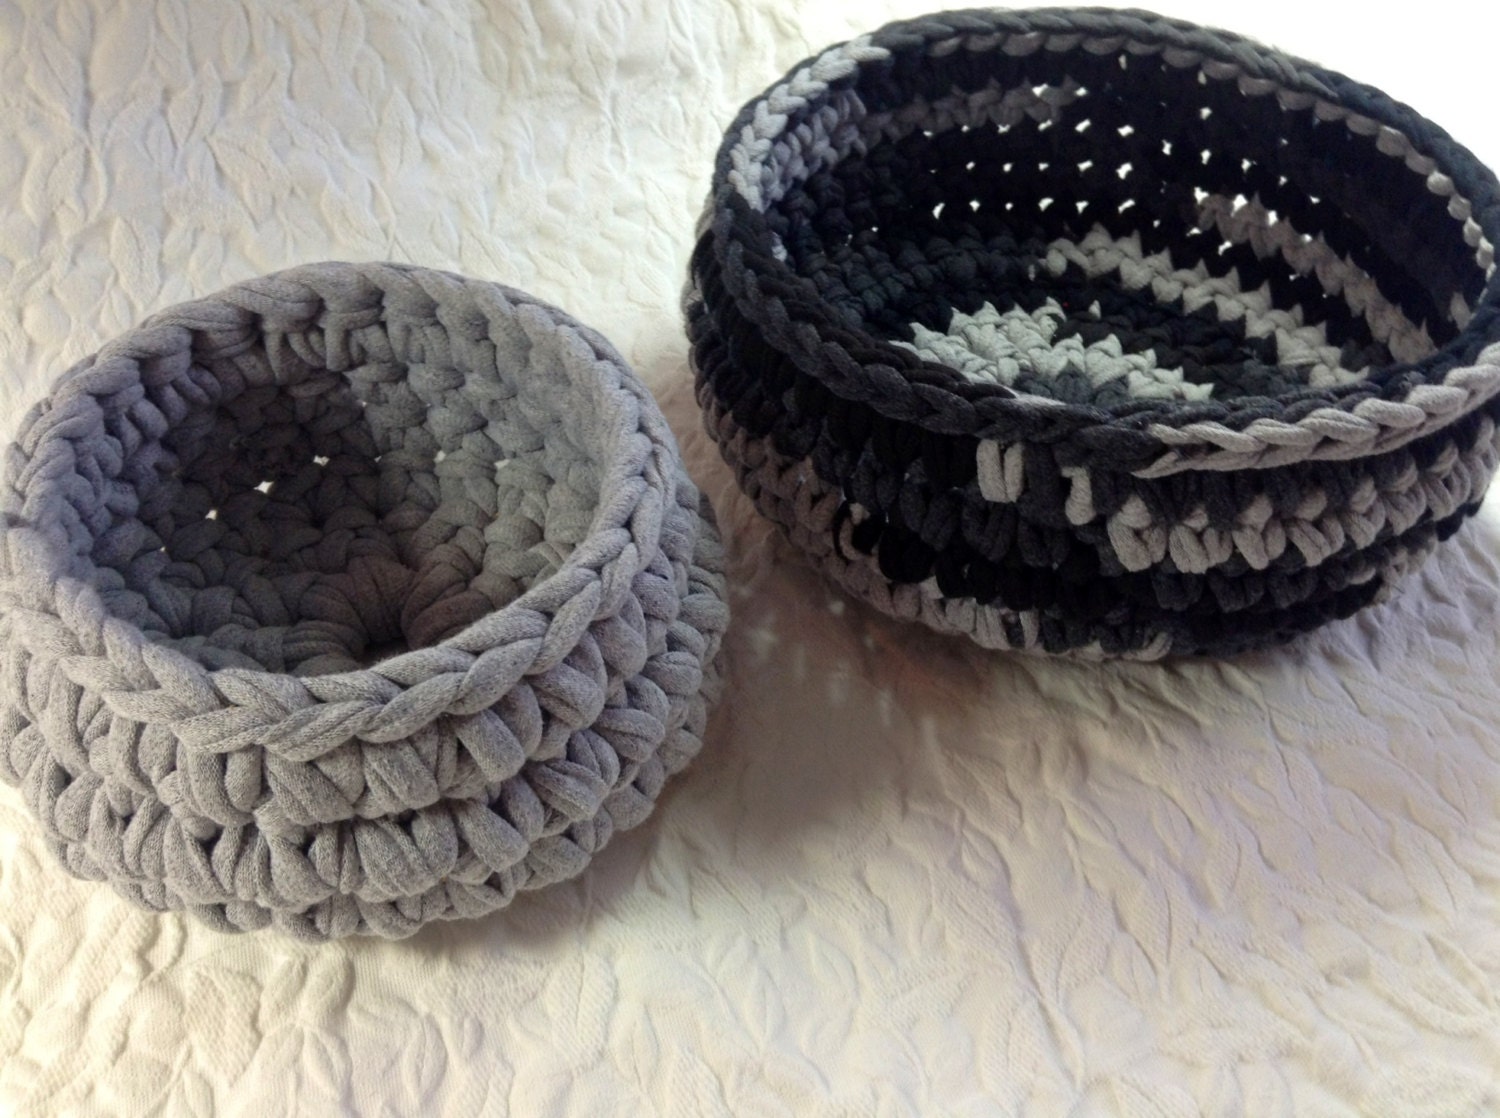 Black and gray cotton crocheted baskets created from recycled t shirts